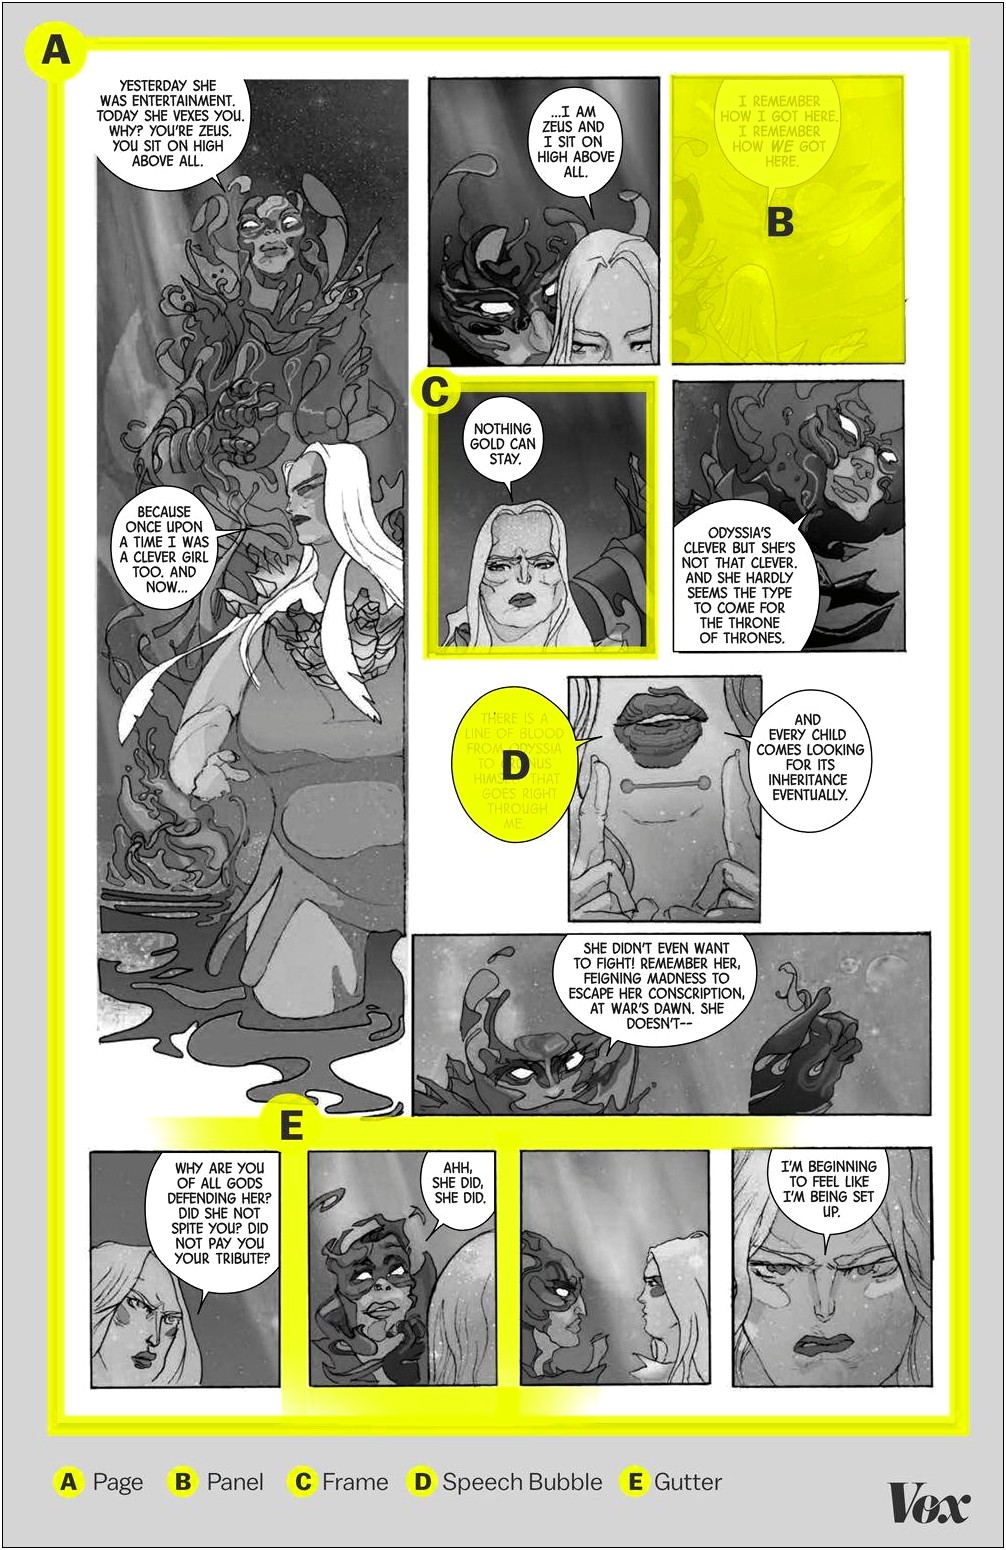 Comic Book Story Synopsis Template Word